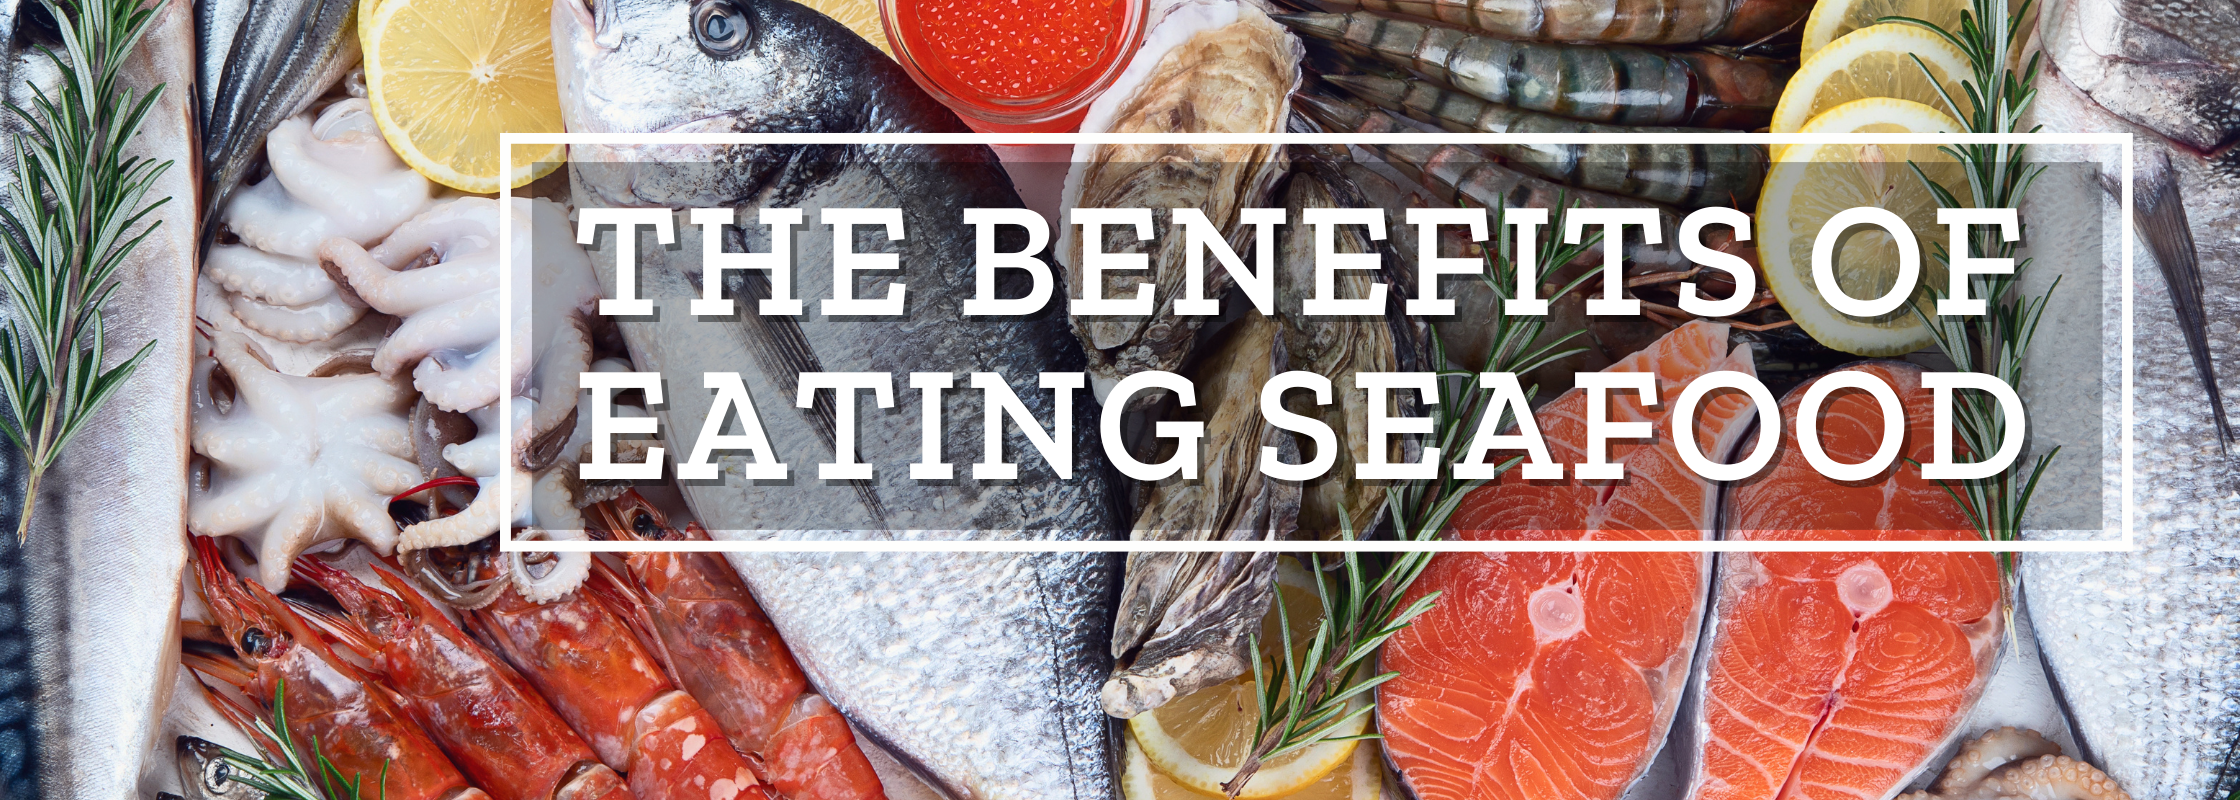 The Benefits of Eating Seafood